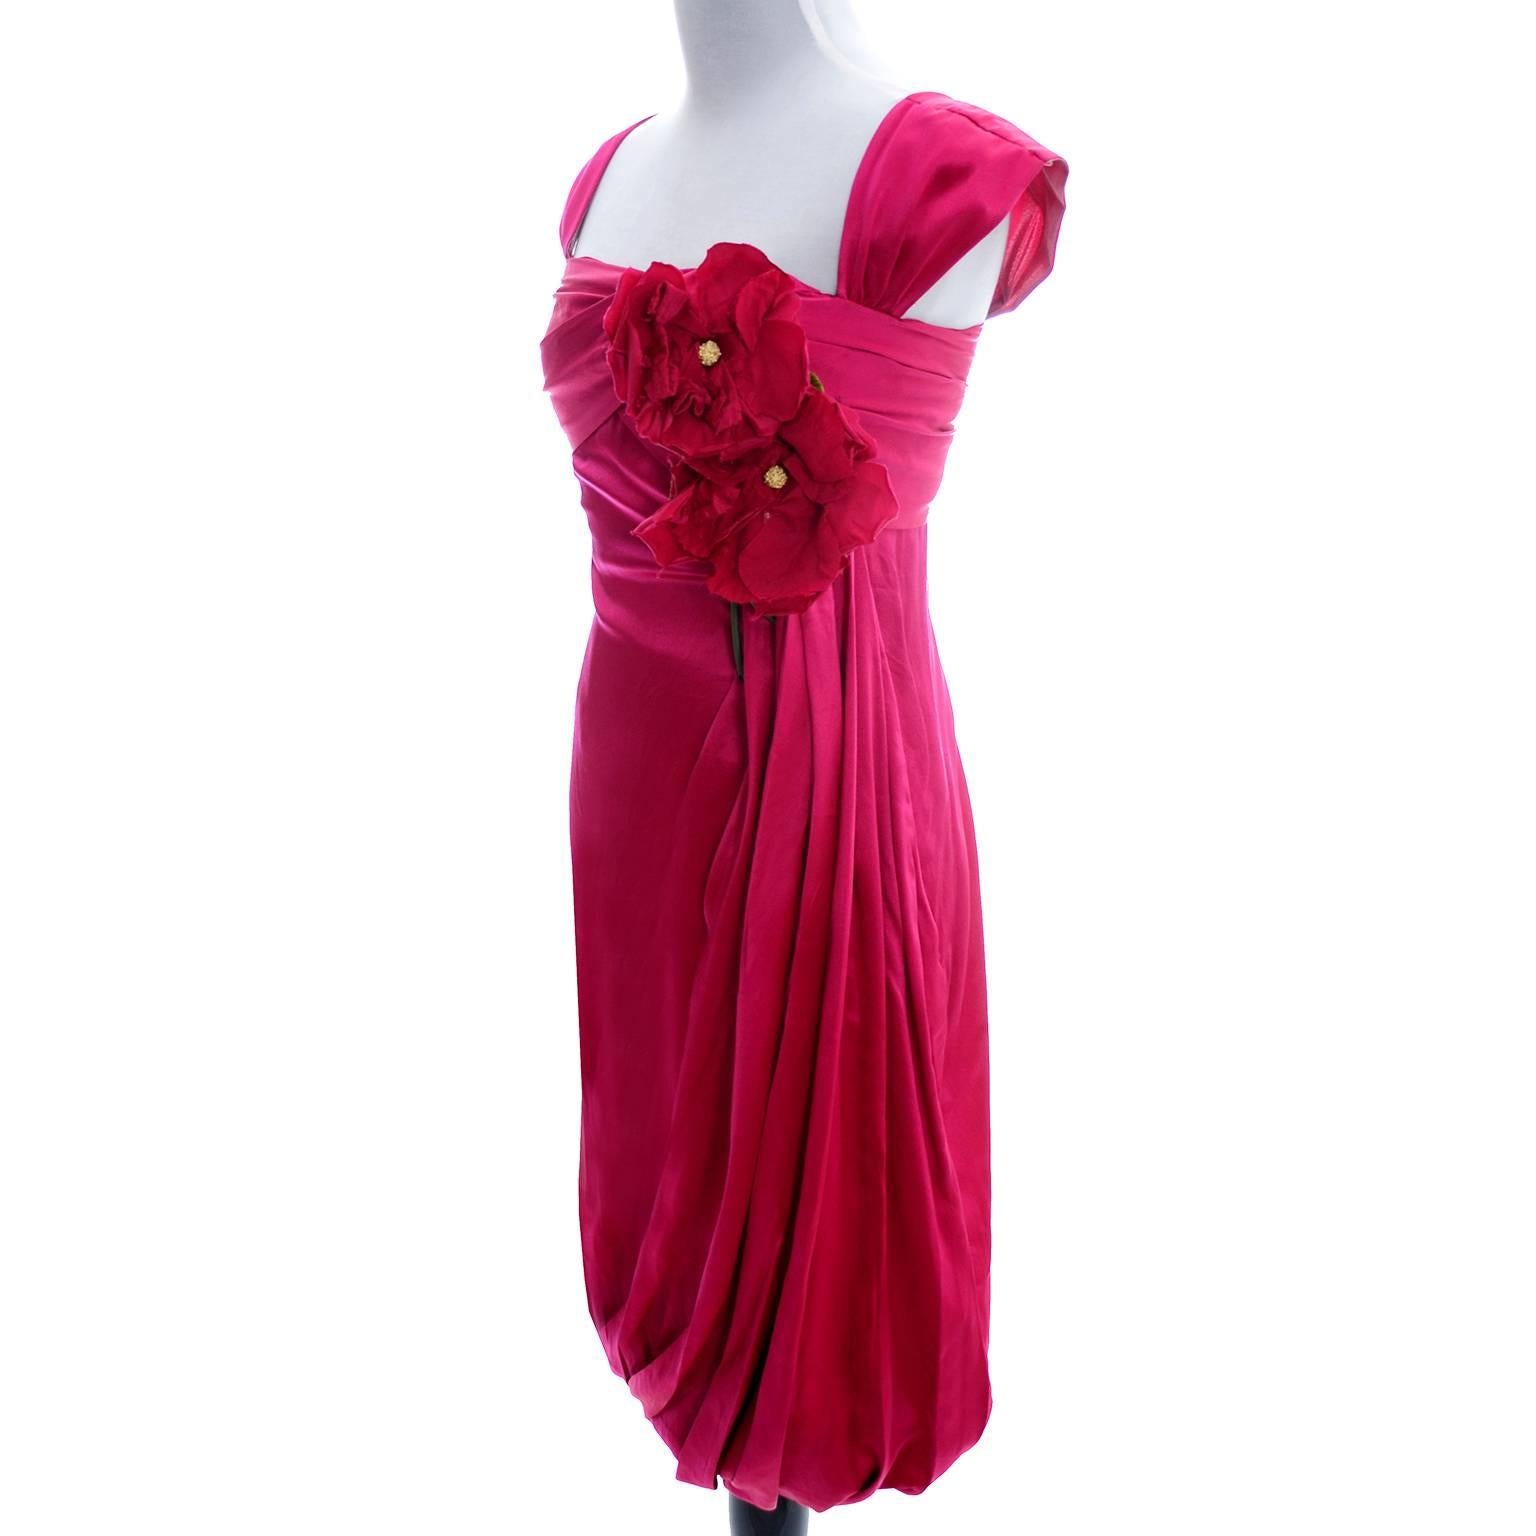 Women's 1960s Raspberry Red Silk Vintage Dress With Draping & Roses 